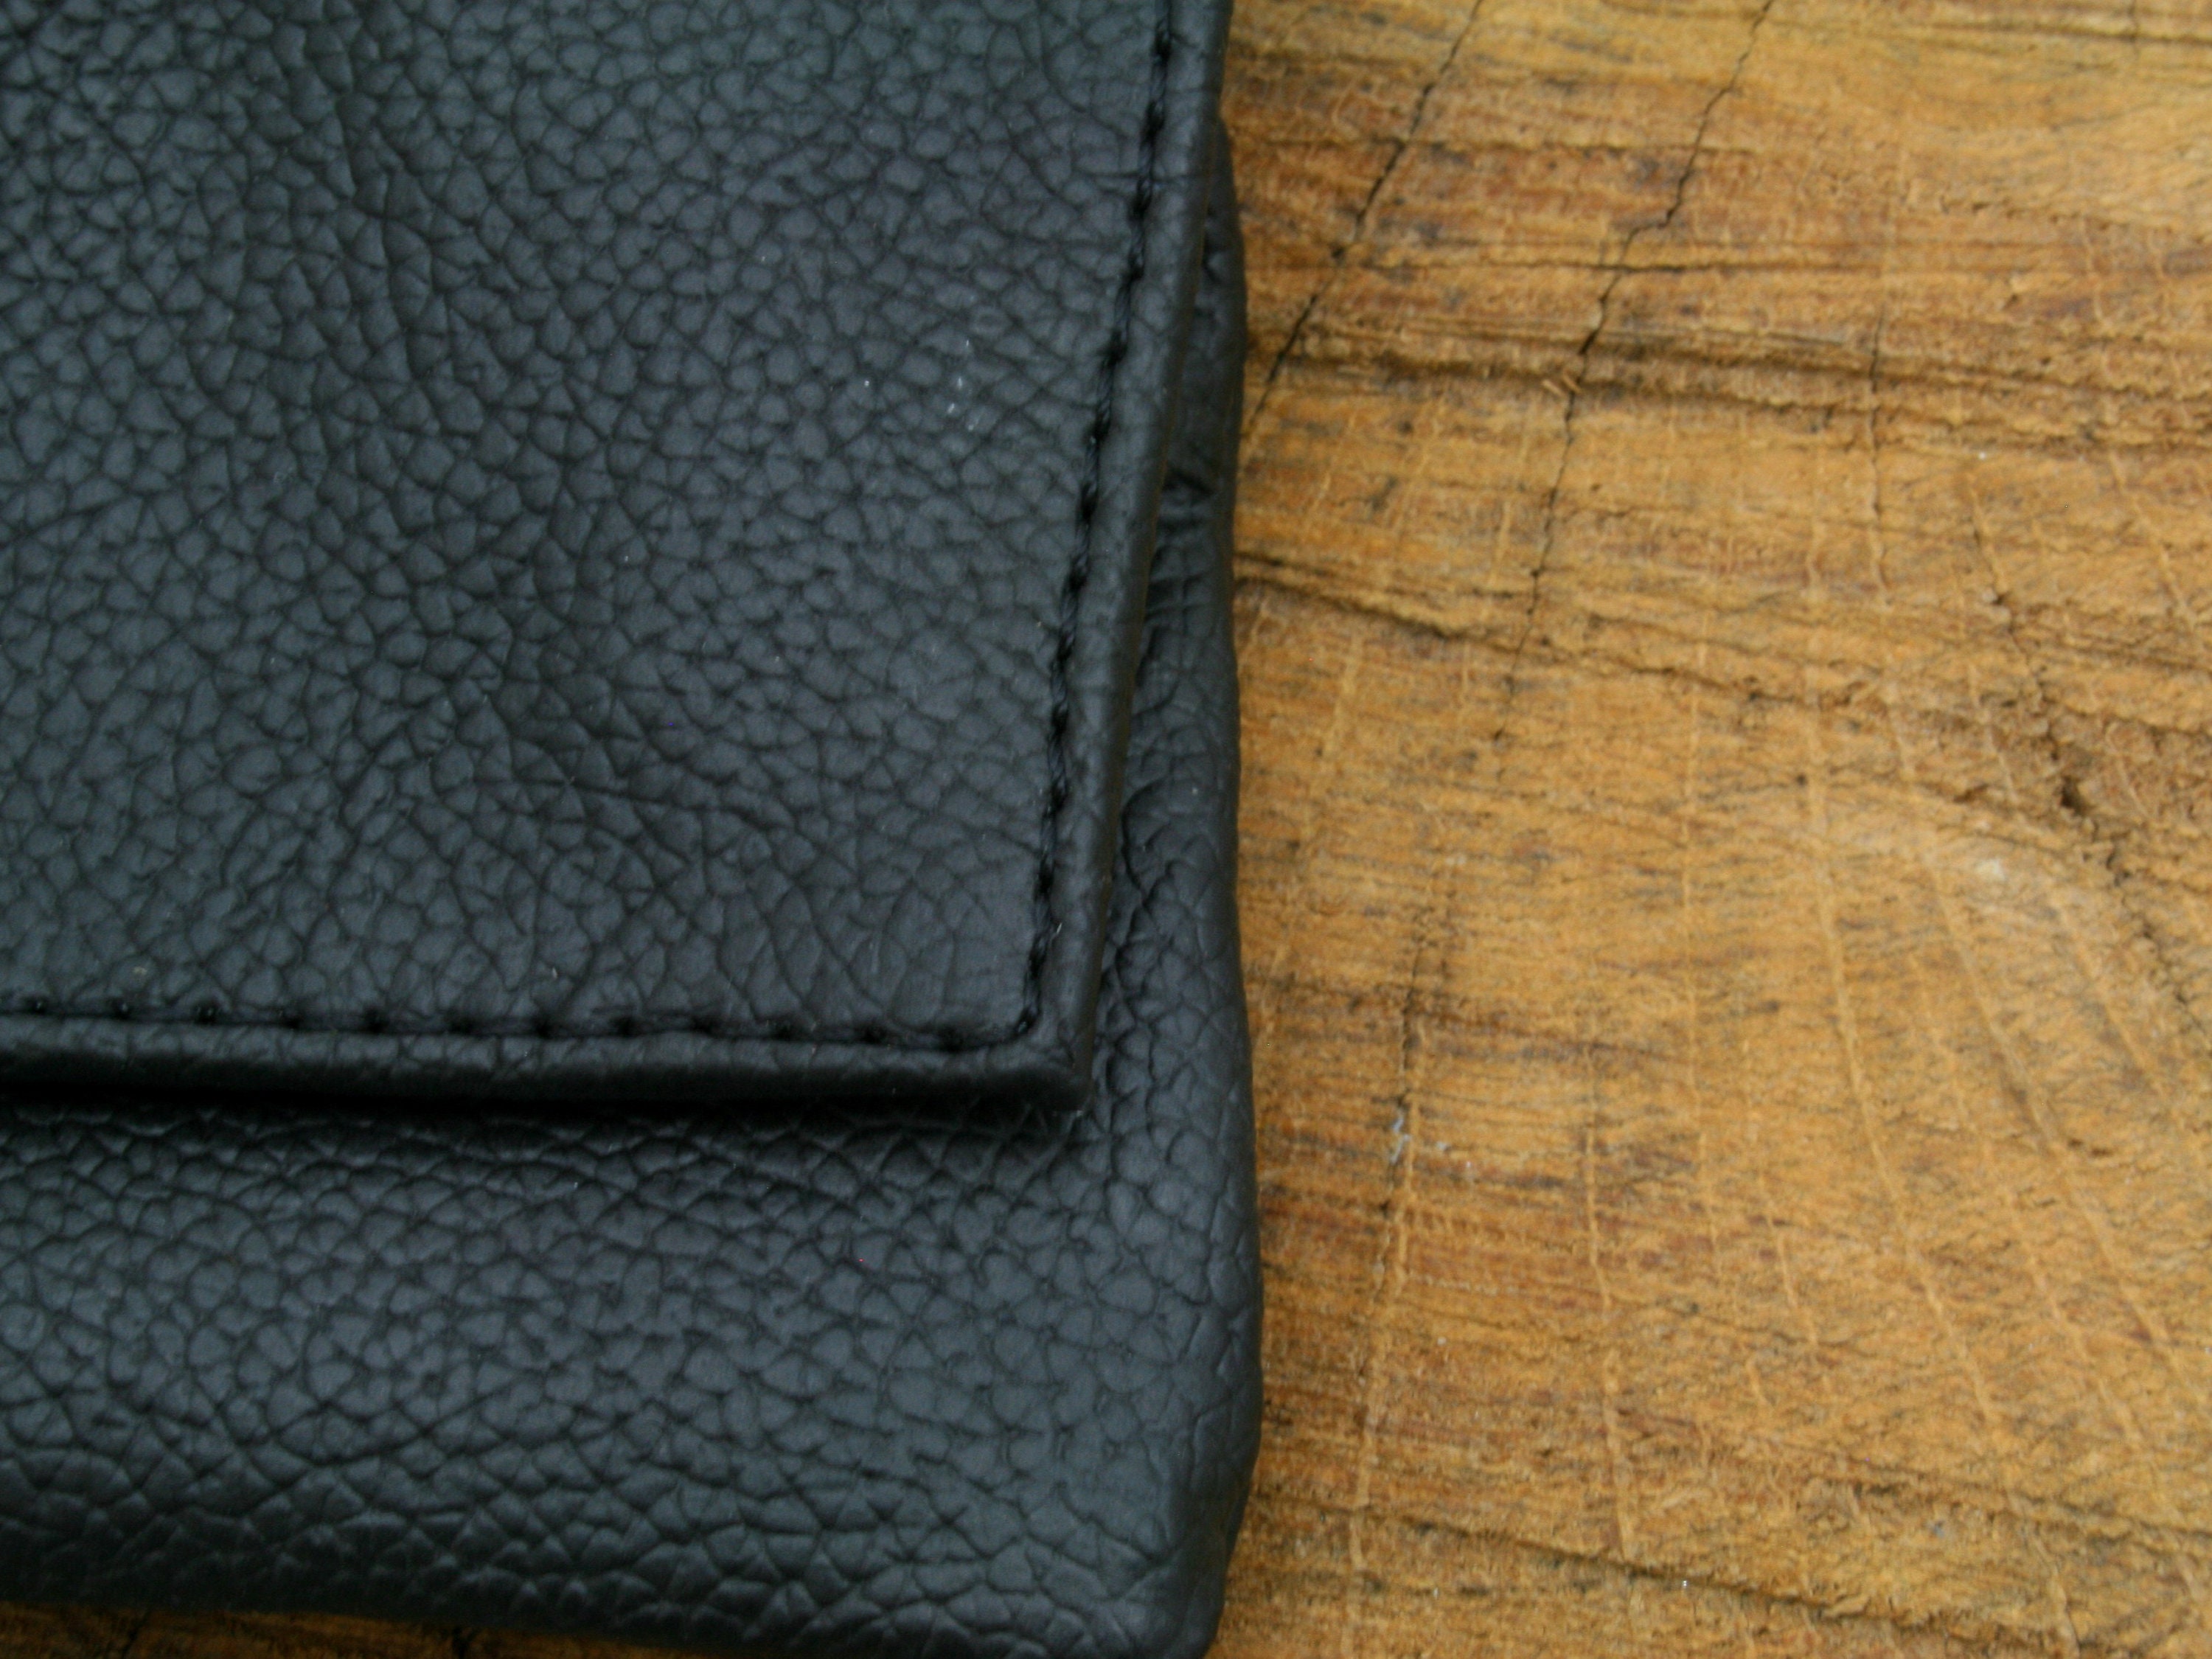 Shop Leather Tobacco pouch at Fashion Racing